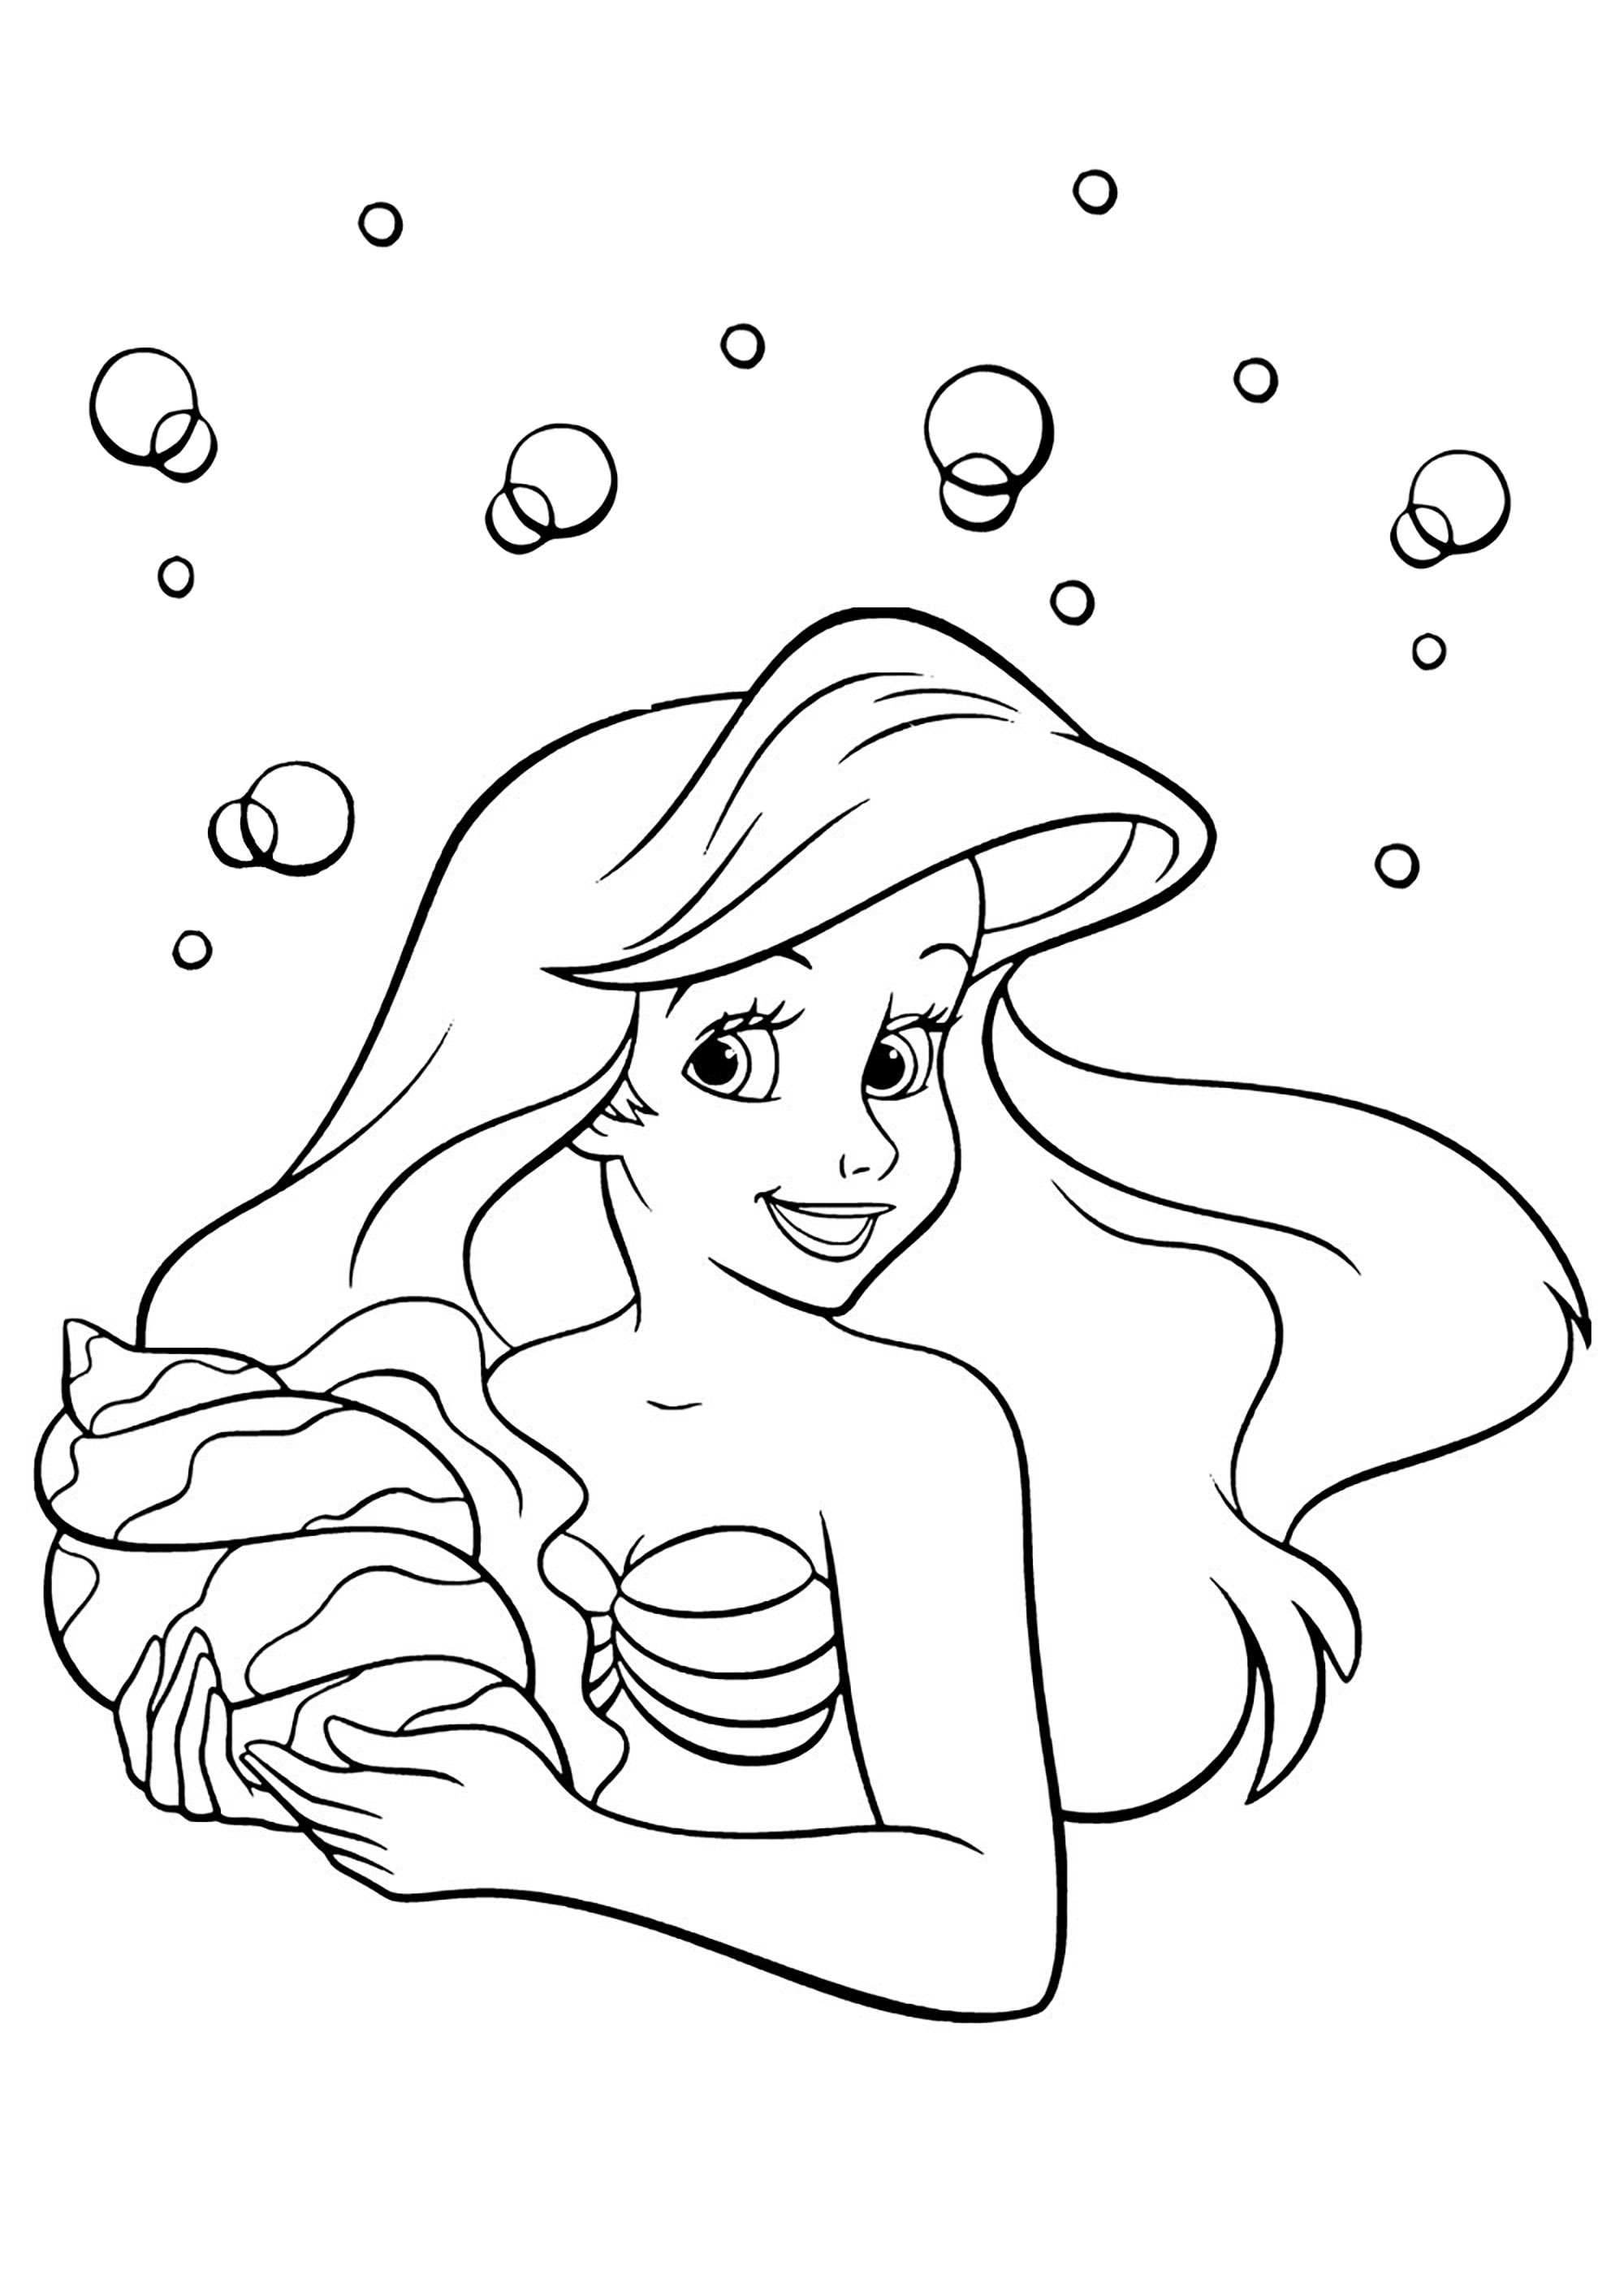 Simple The Little Mermaid coloring page for kids